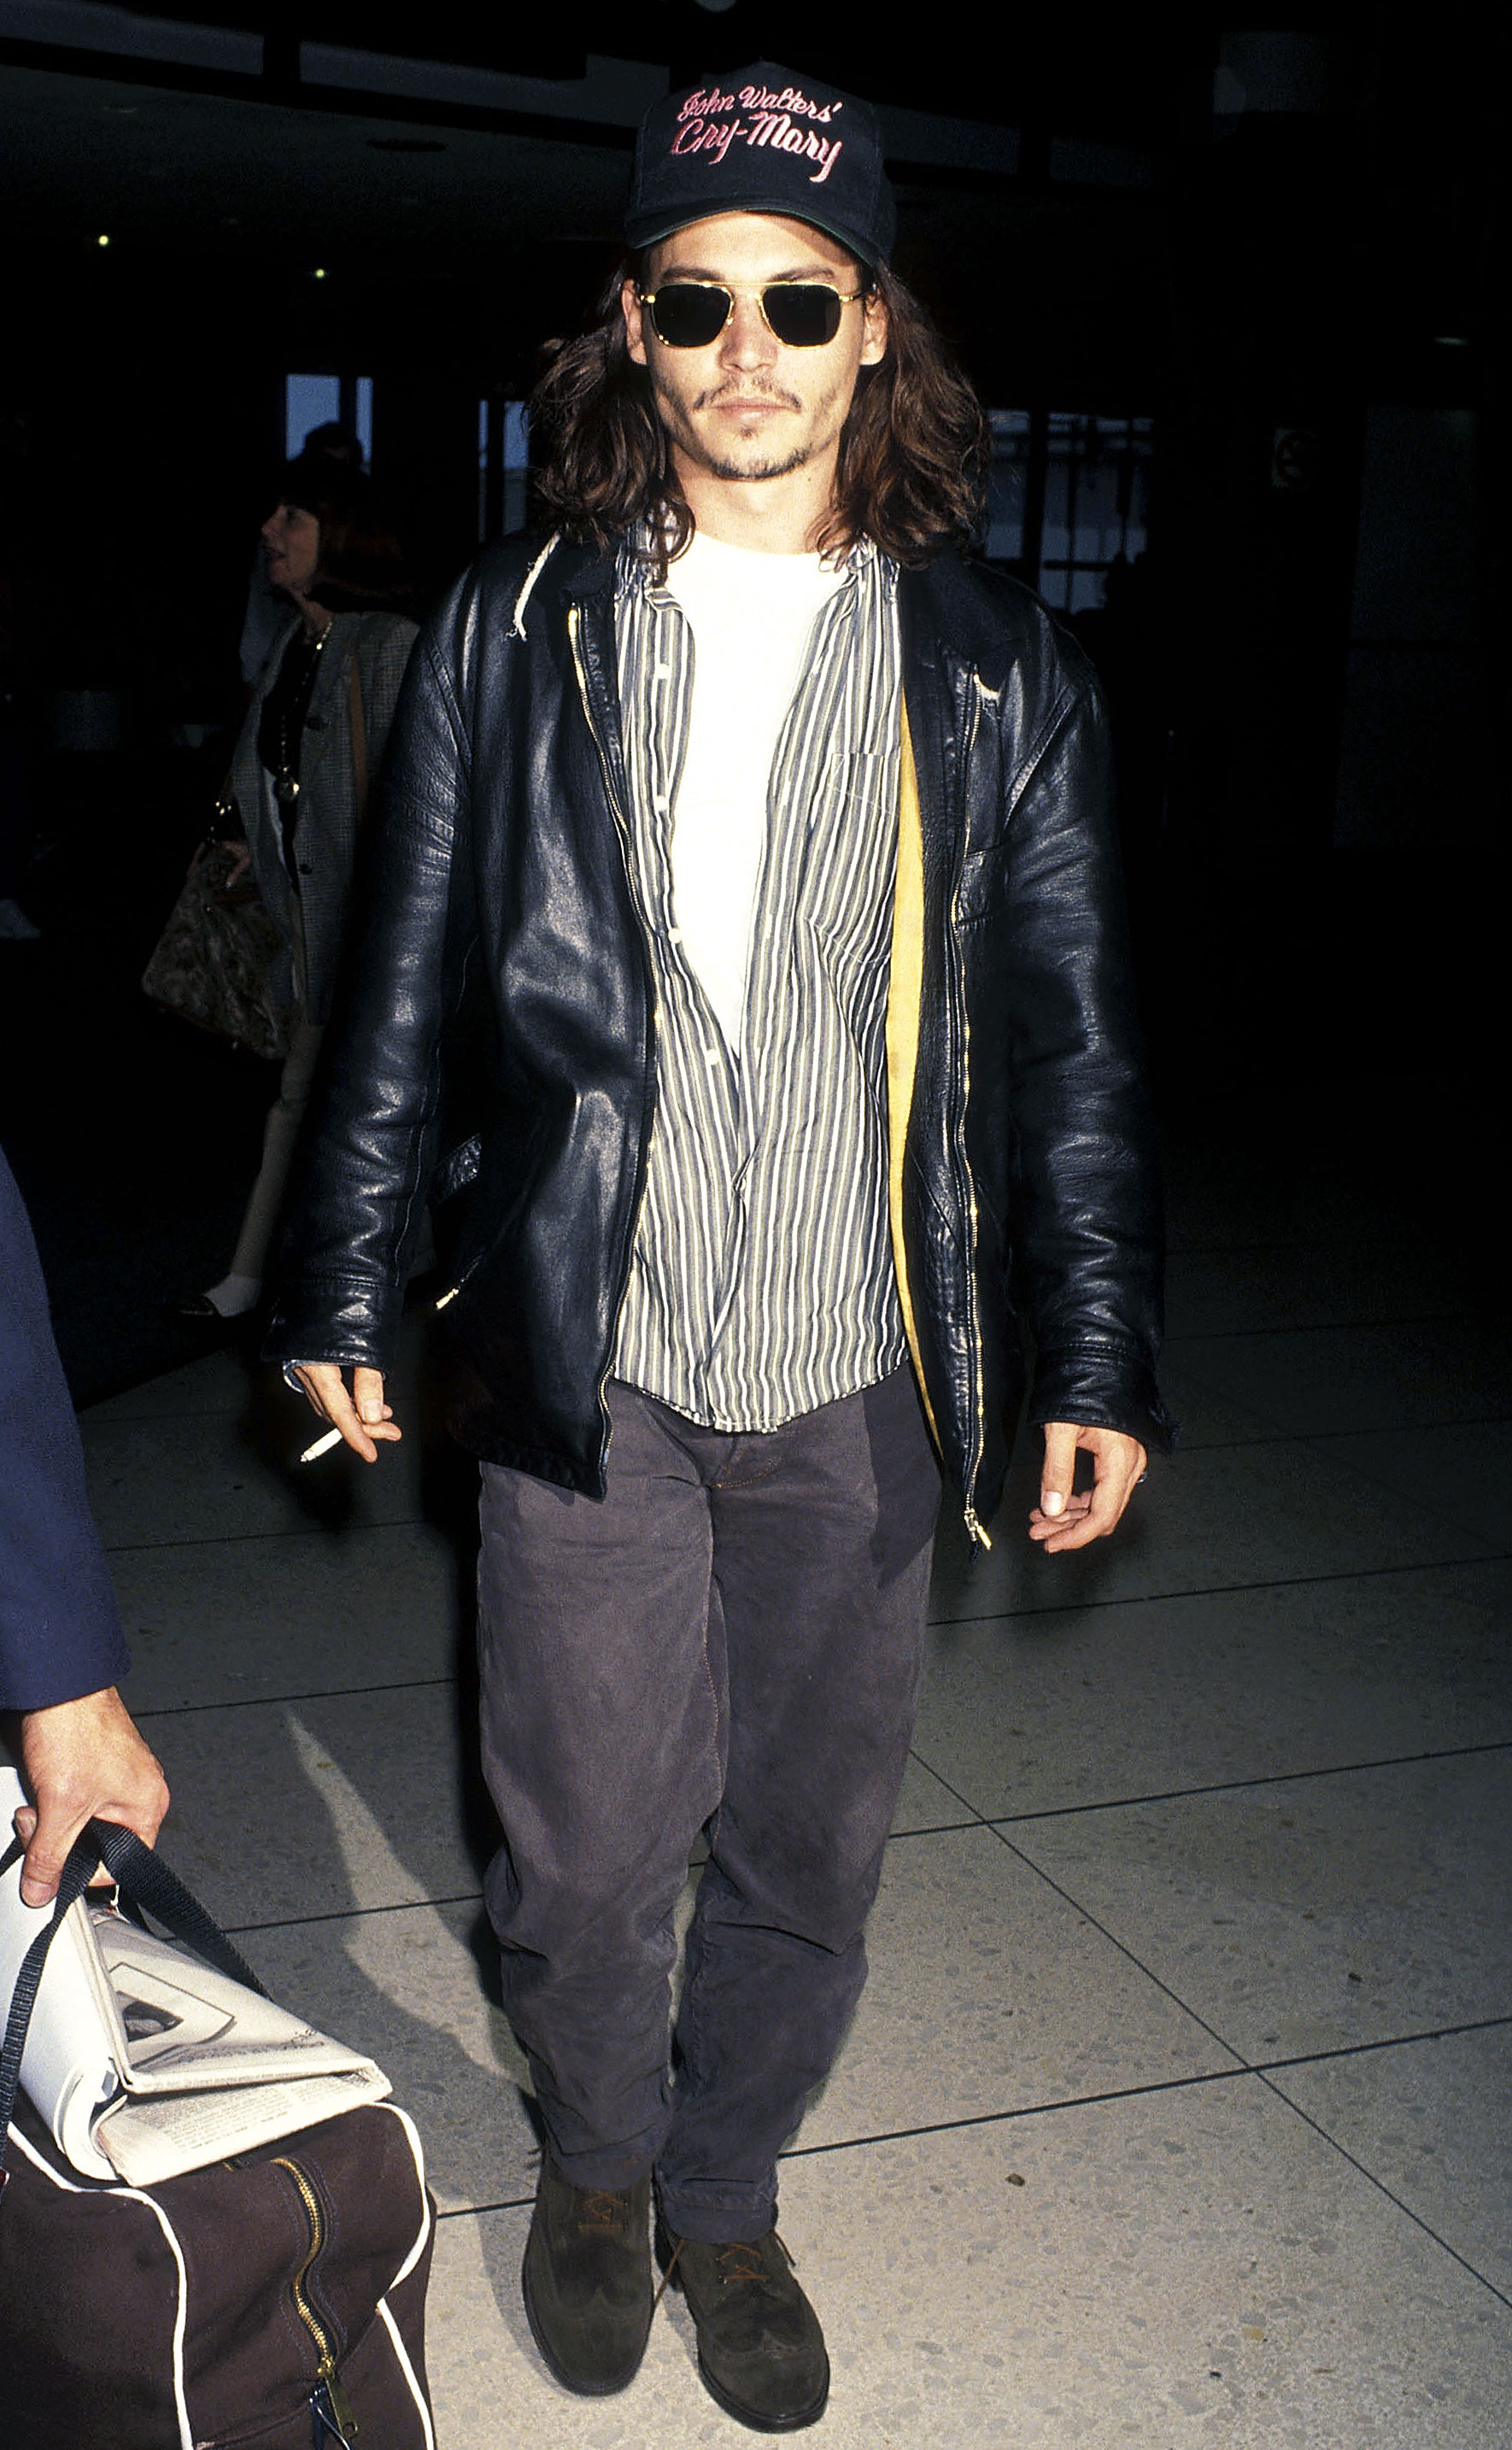 Discover the Epic 80s Style of Johnny Depp: Get Inspired!